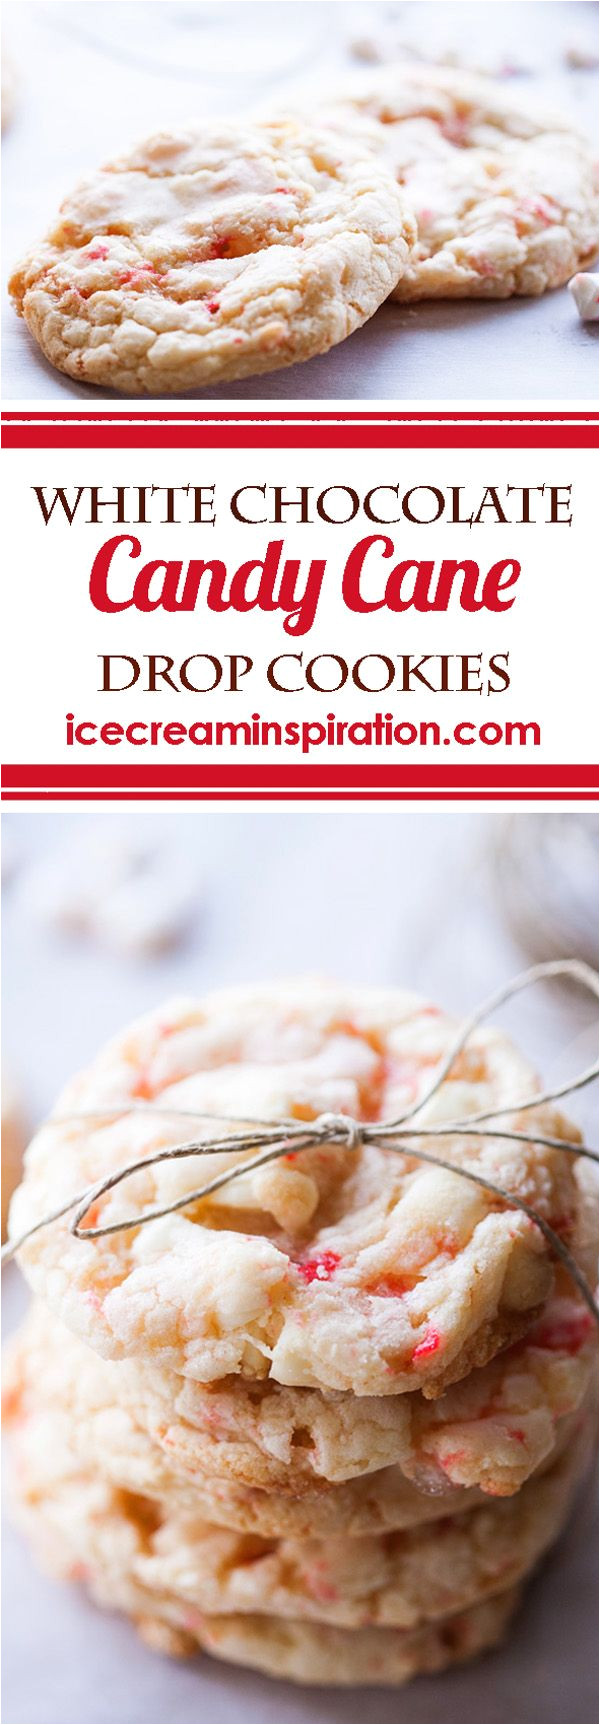 white chocolate candy cane drop cookies